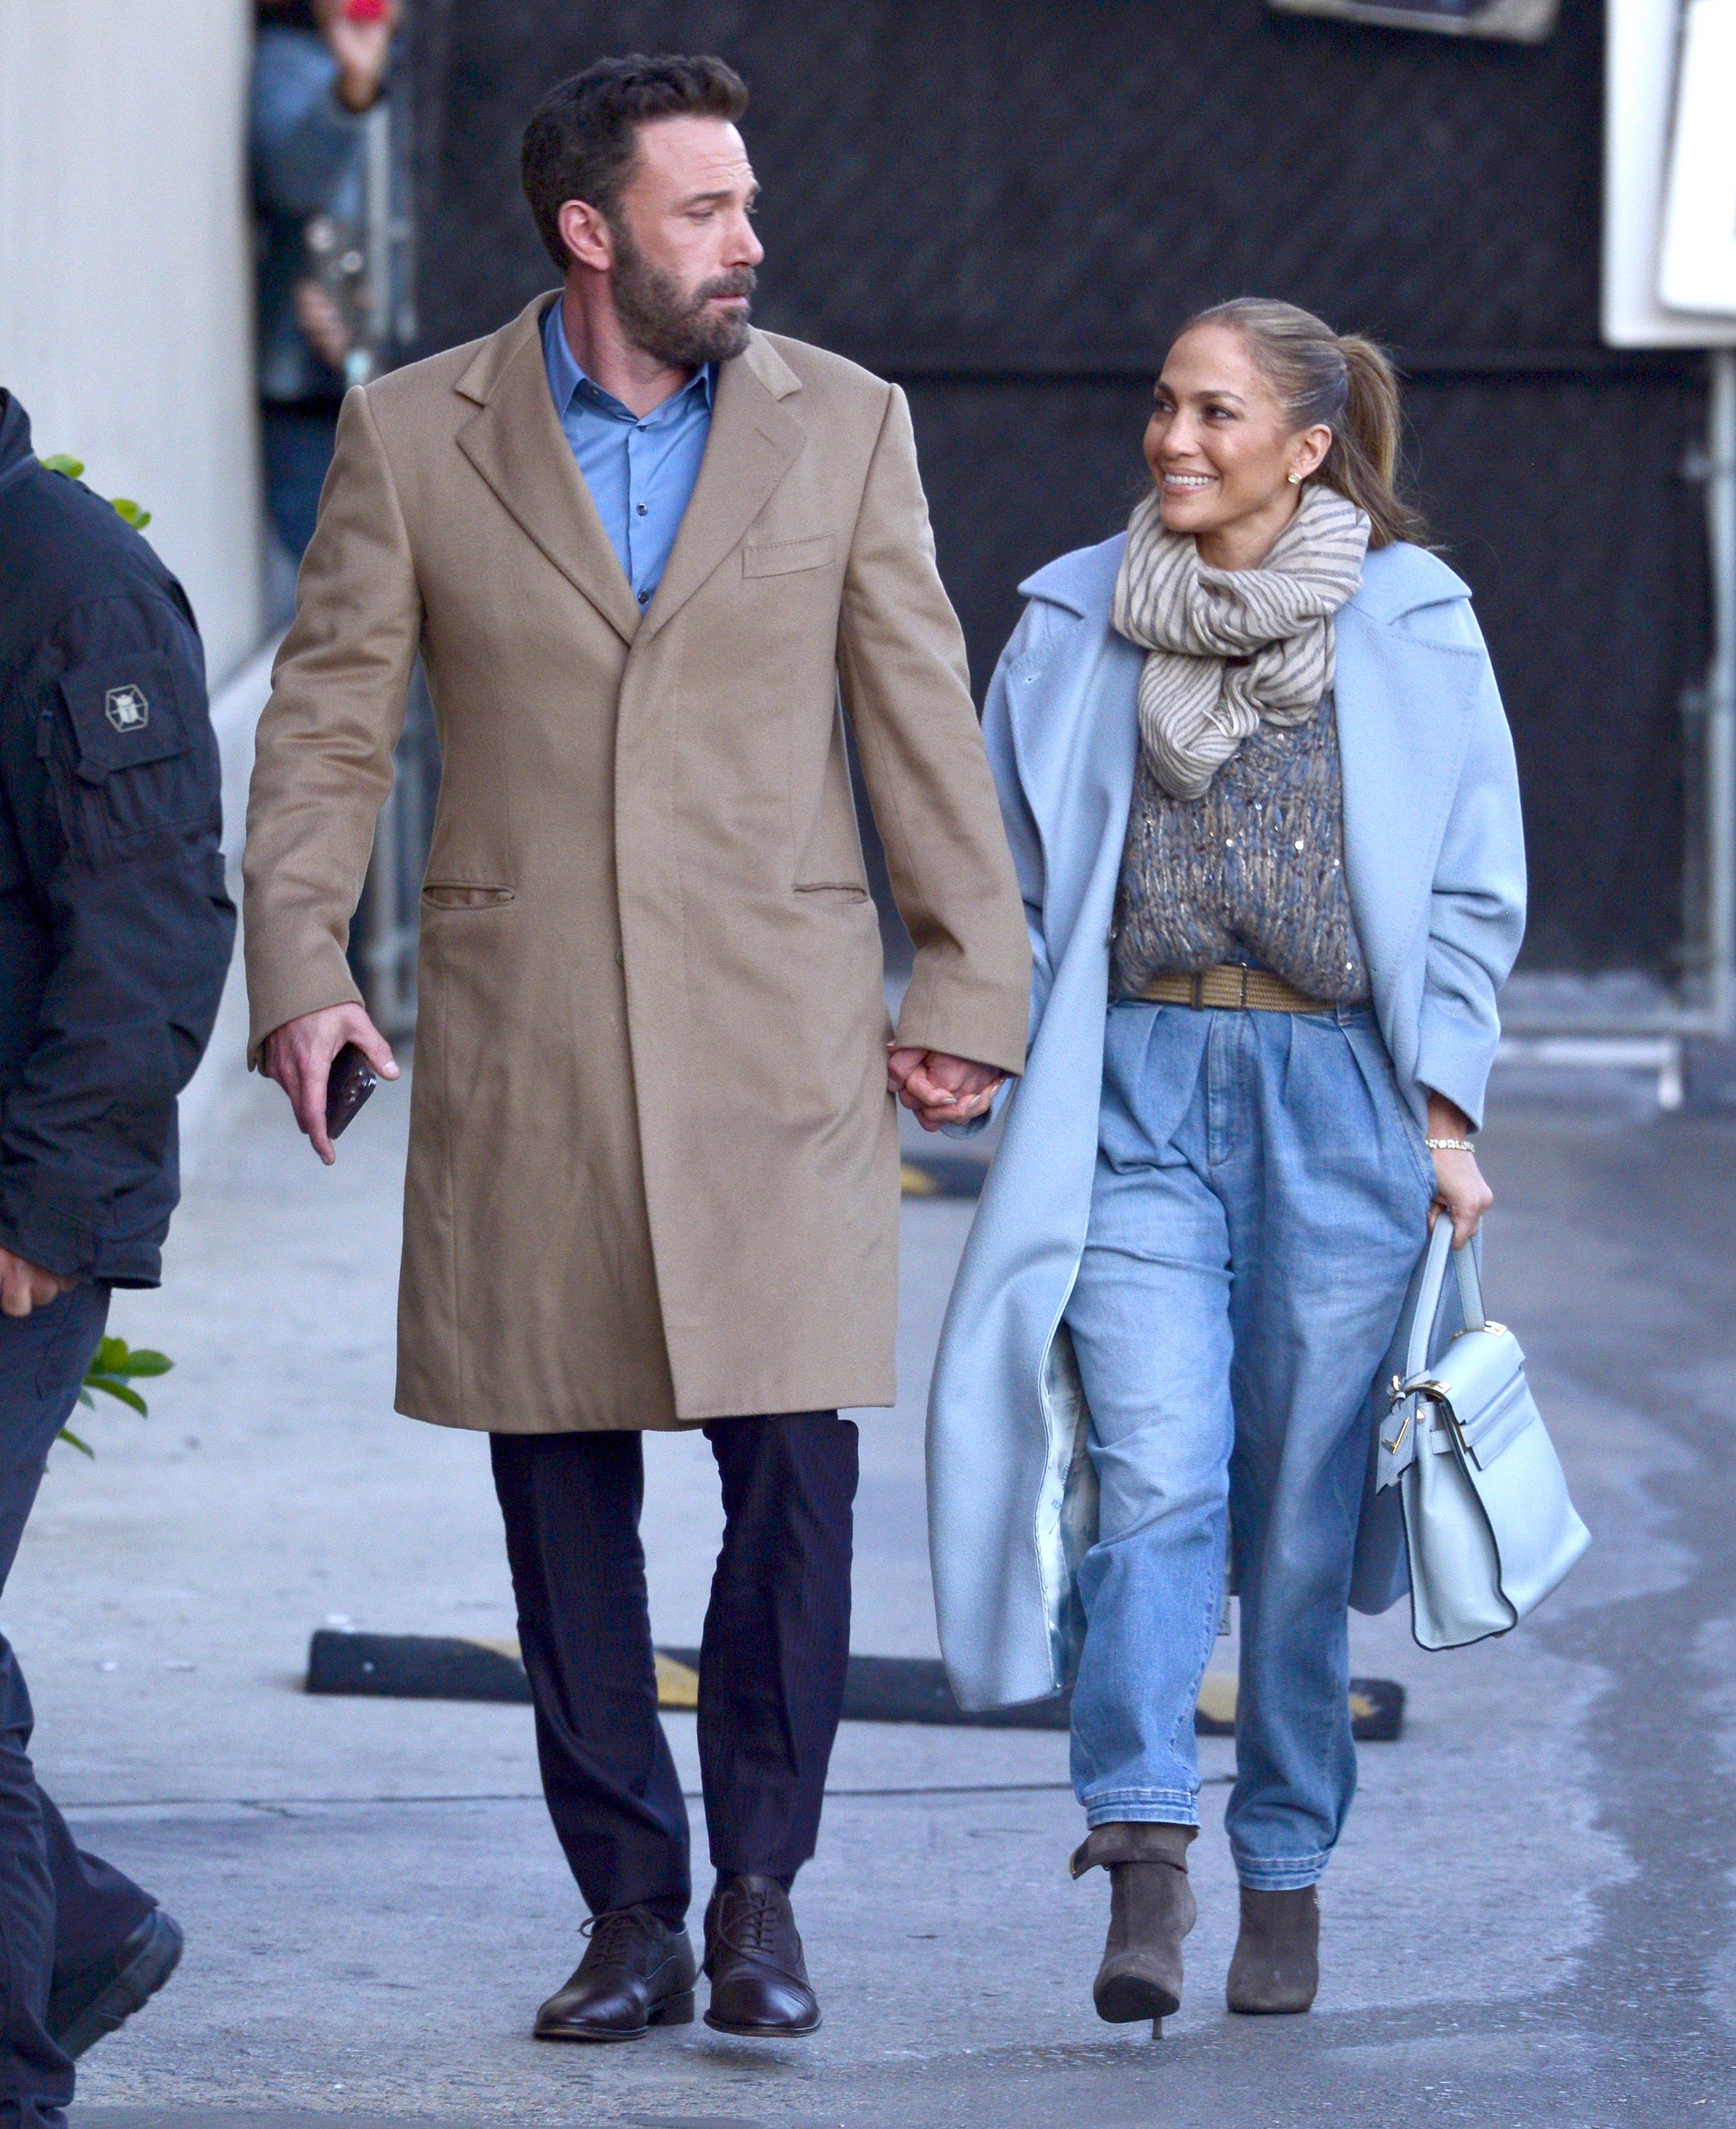 Ben Affleck and Jennifer Lopez seen on December 15, 2021 in Los Angeles, California.  / Source: Getty Images